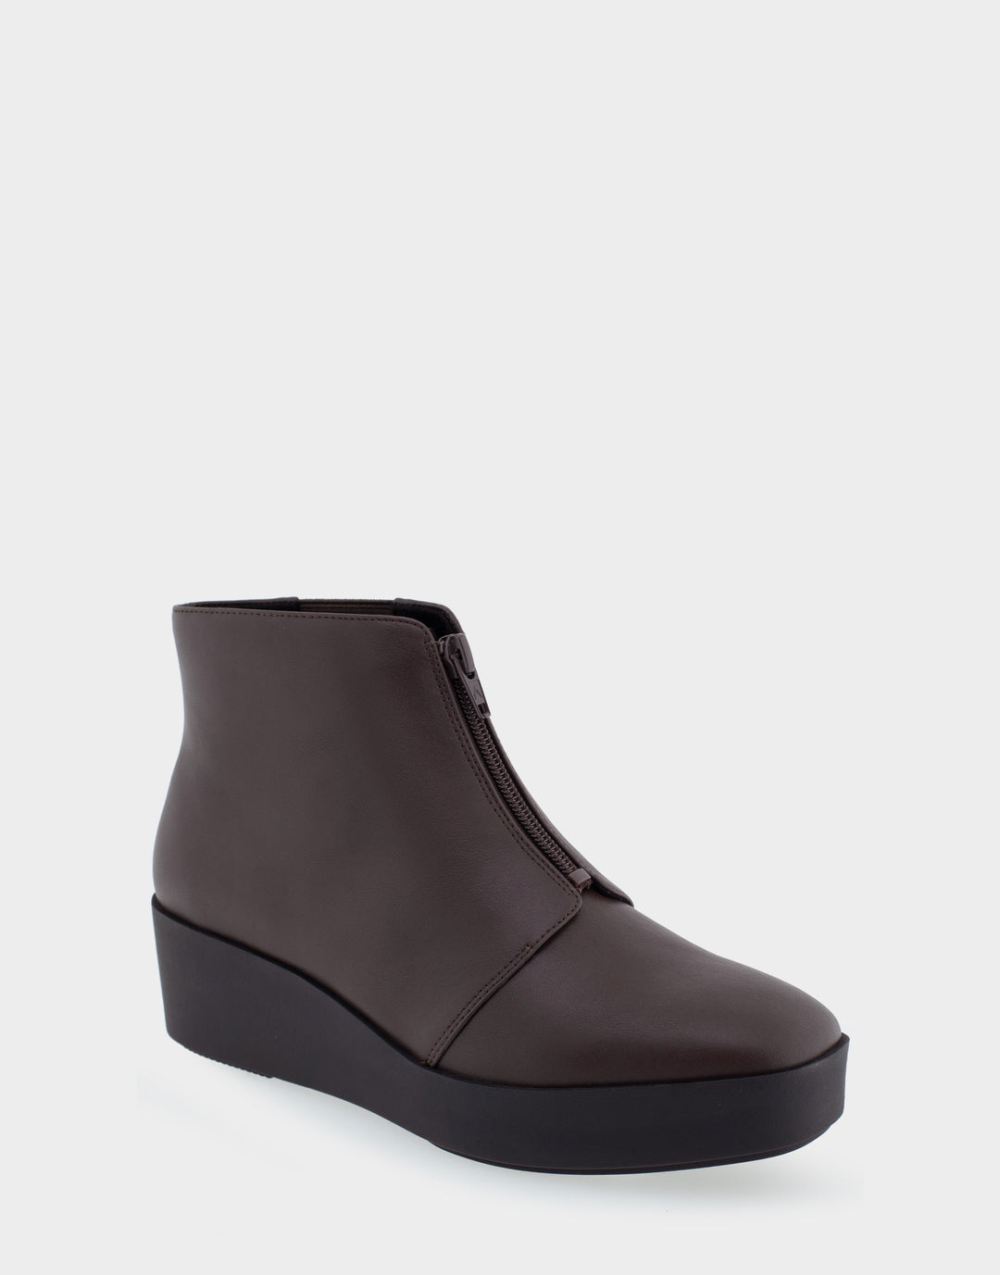 Women's | Carin Java Faux Leather Wedge Heel Ankle Boot